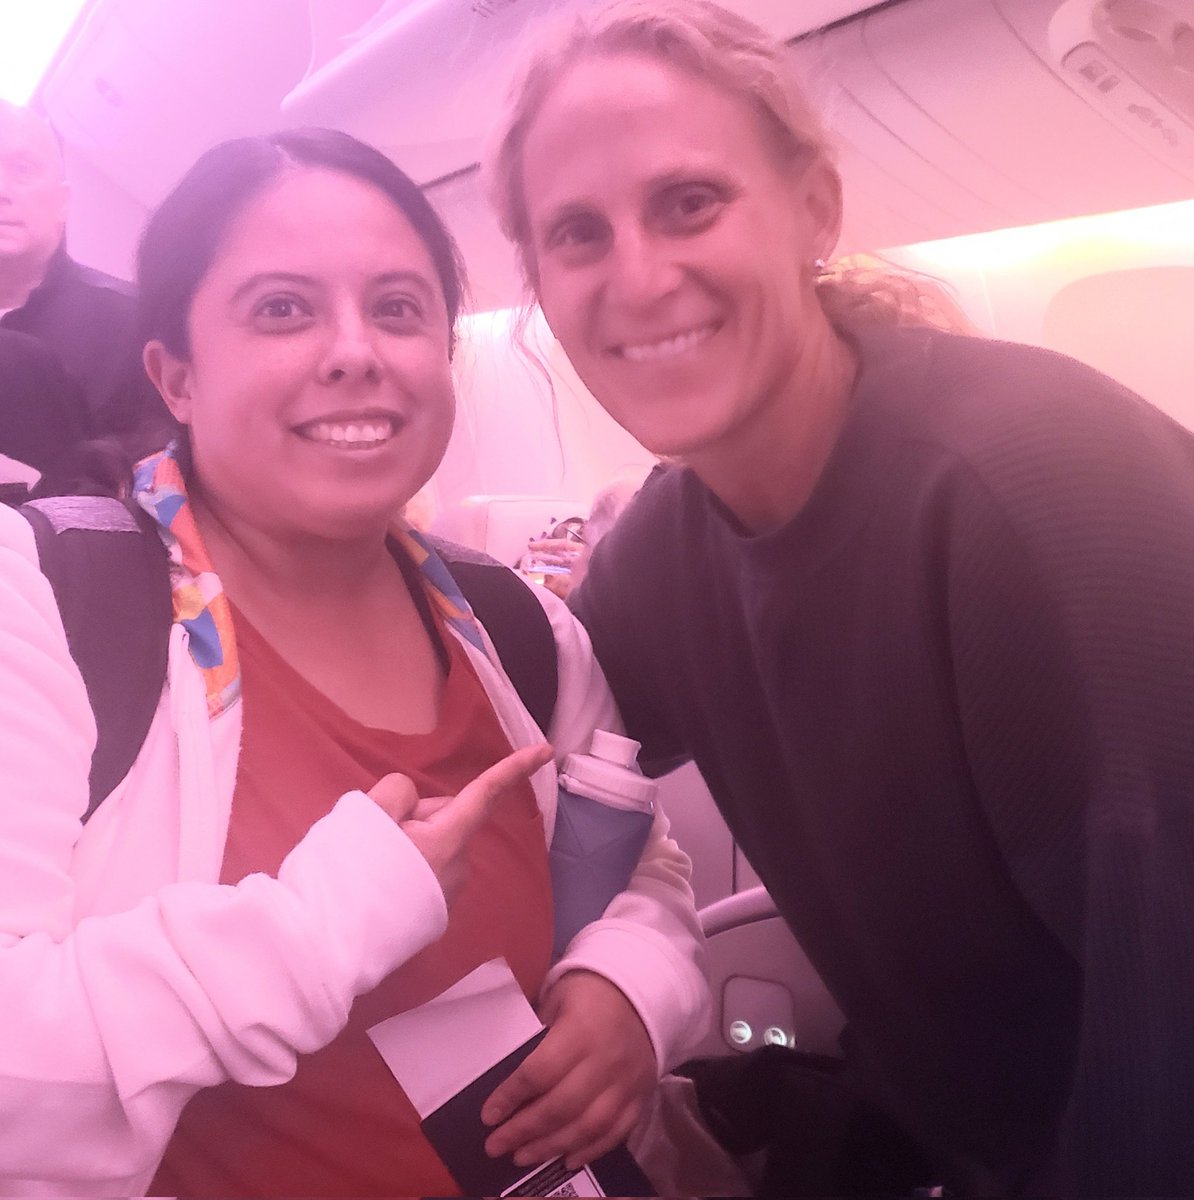 Ok so yesterday I was too shy to ask Kristine Lilly for a picture at the Sky Tower but guess who I am on the same flight with?!?! KRISTINE LILLY!!! This was my moment LOL. I asked and I received. Thank you so much @KristineLilly #LookatGod @USWNT #OlympicGoldMedalist #OG